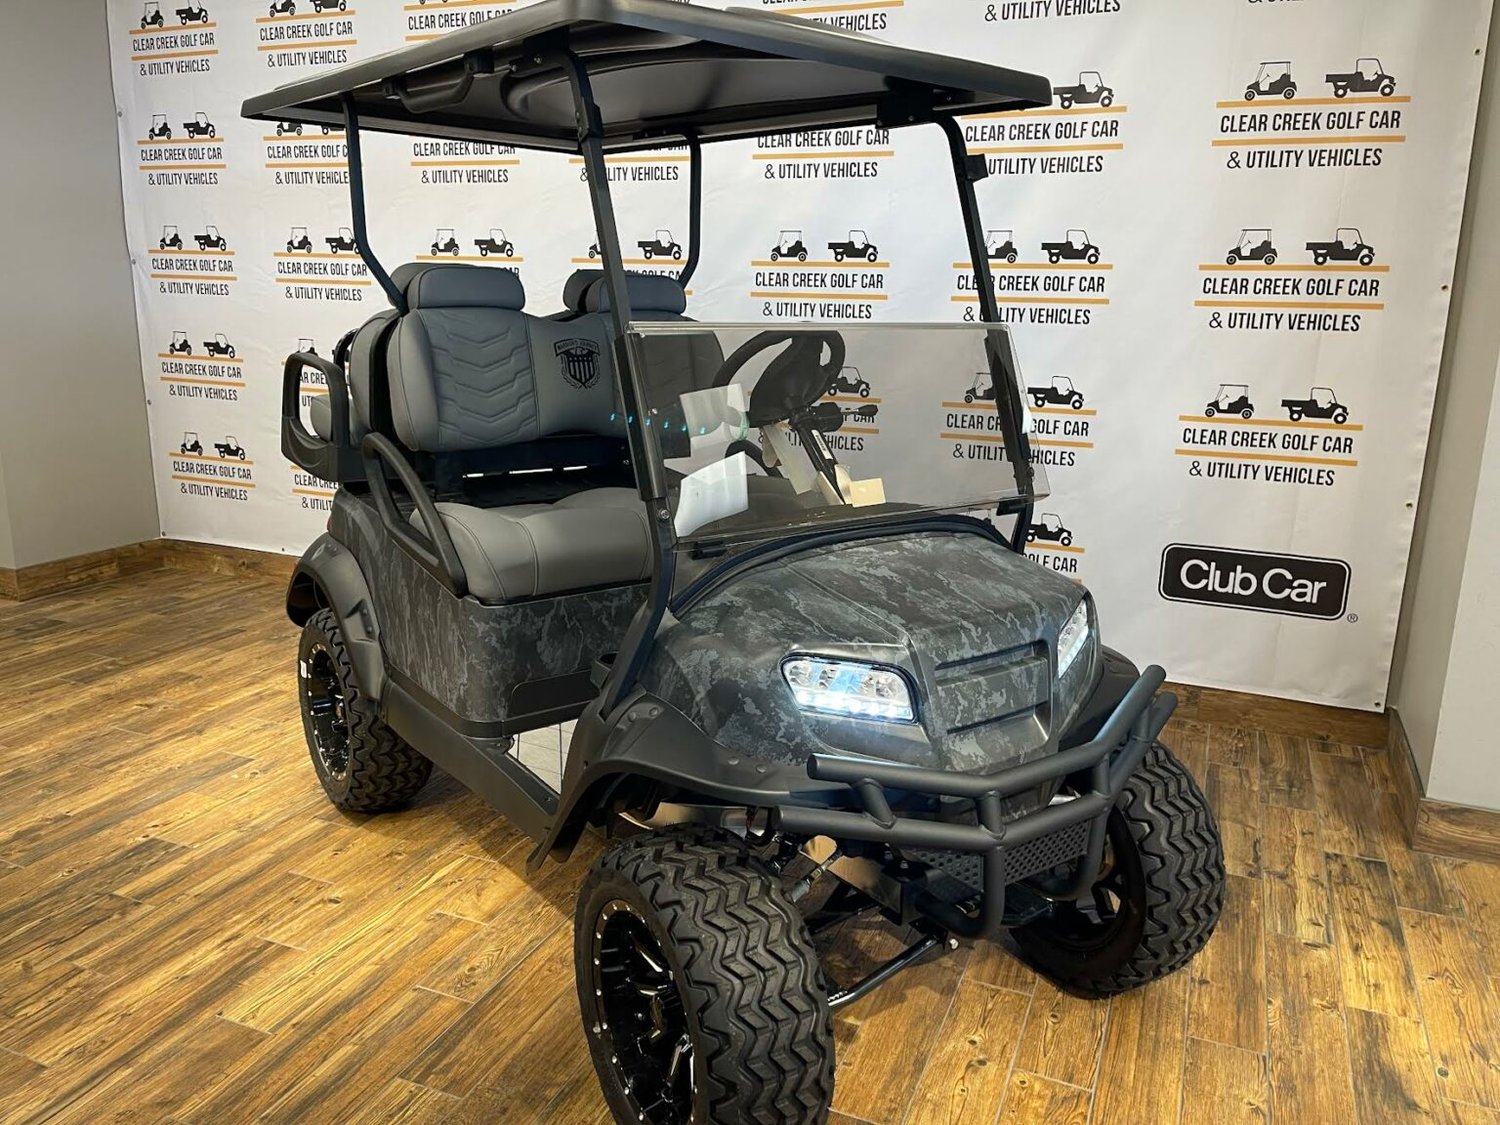 A raffle is being held for a Clear Creek Golf Car vehicle.